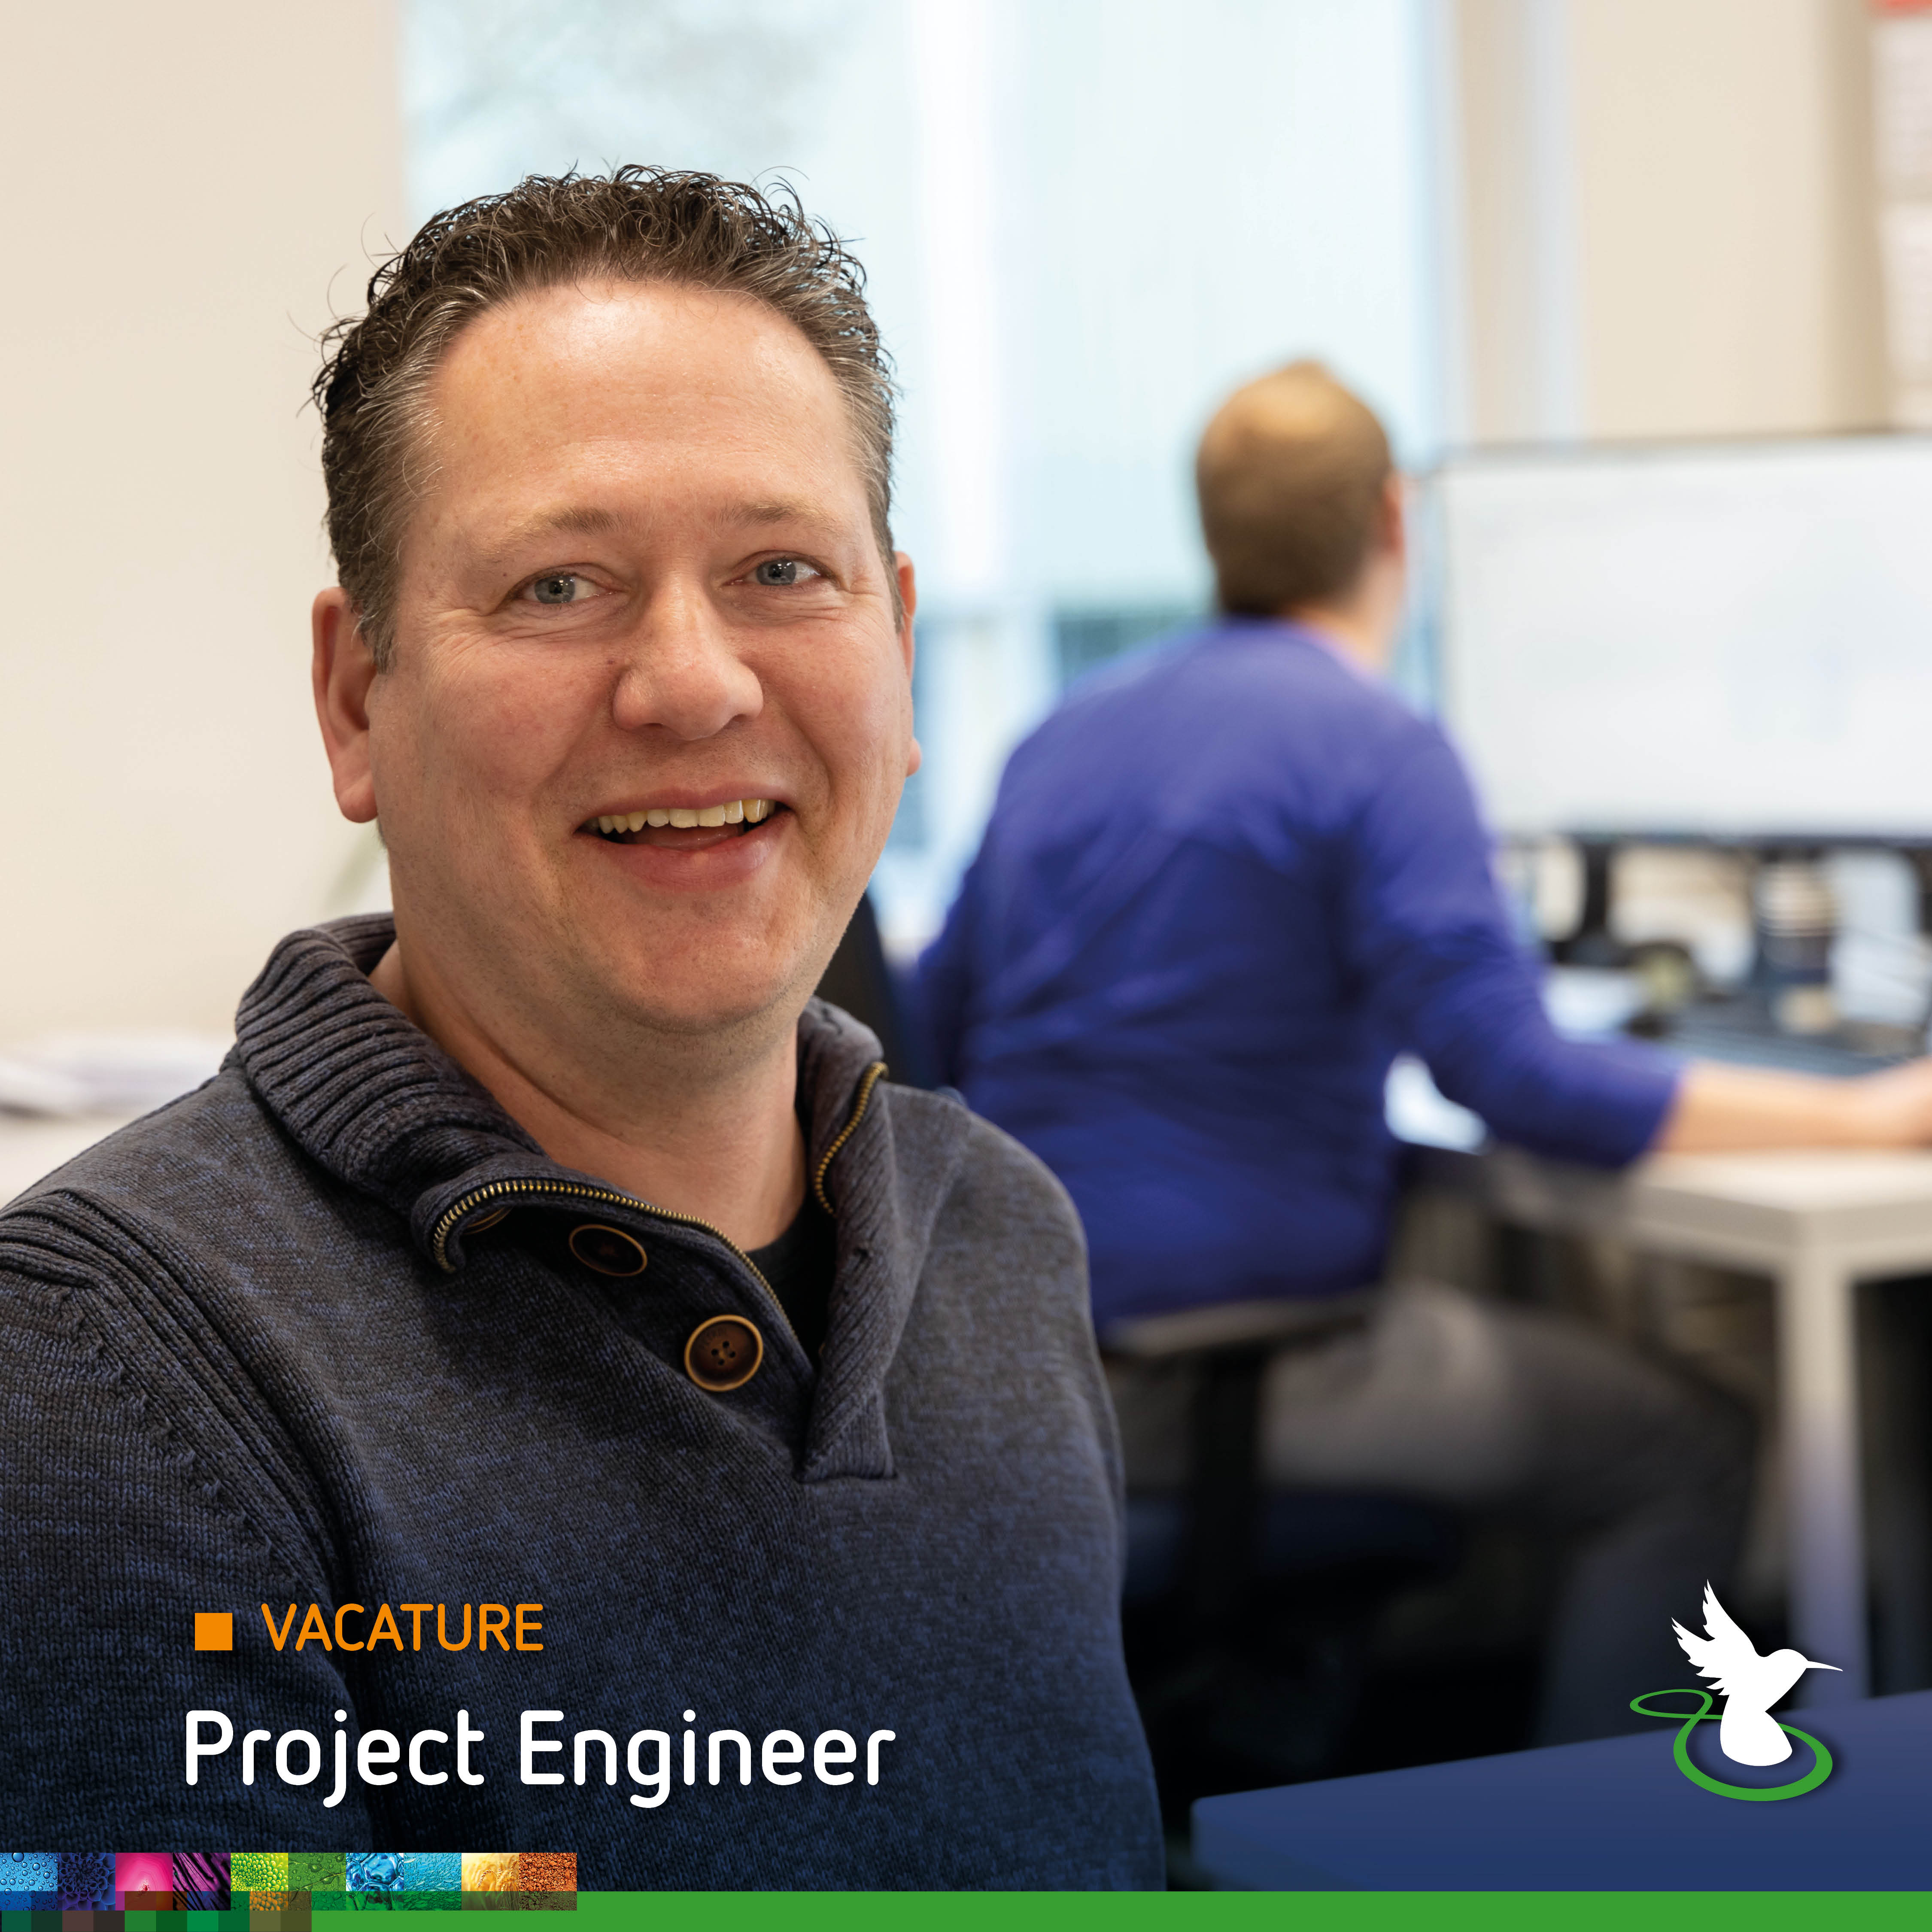 Vacature Project Engineer